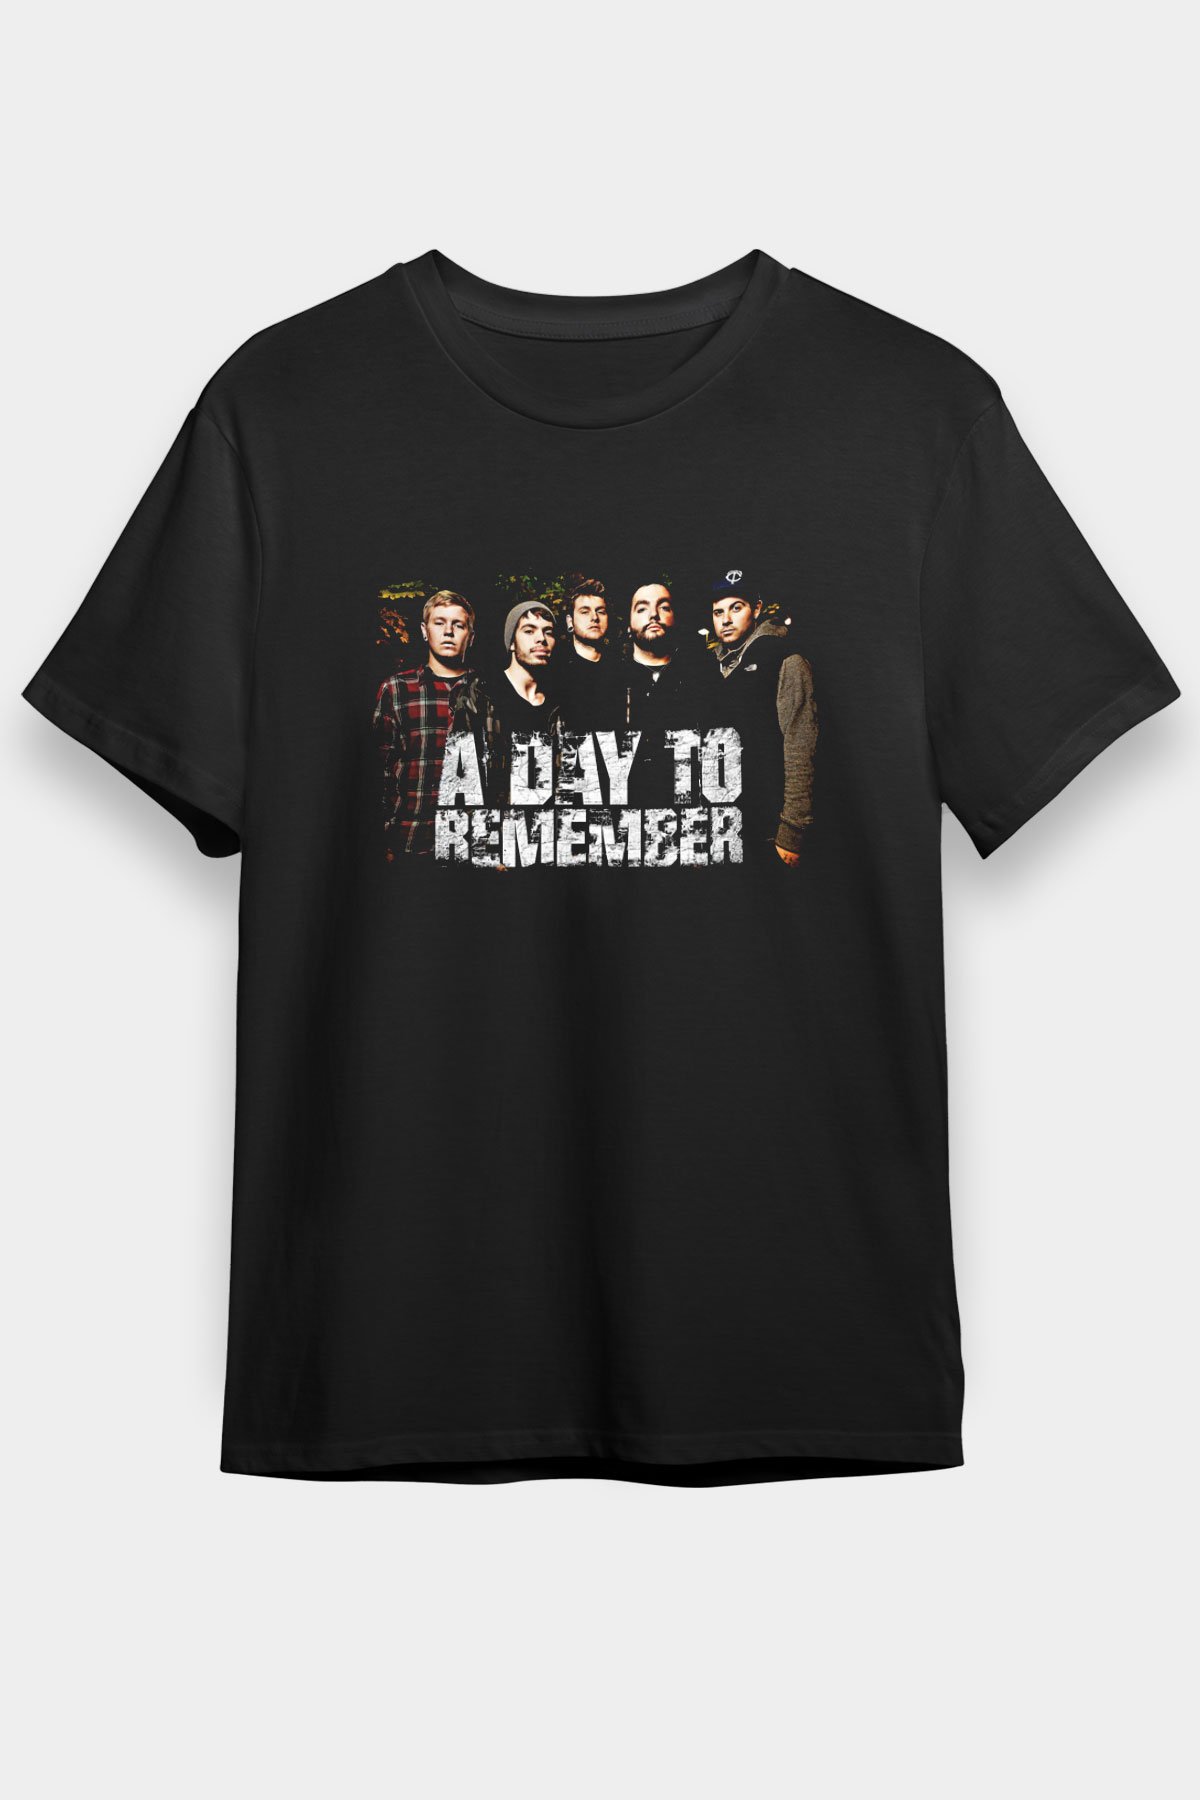 A Day to remember Unisex Black Graphic Tee - STREETWEAR